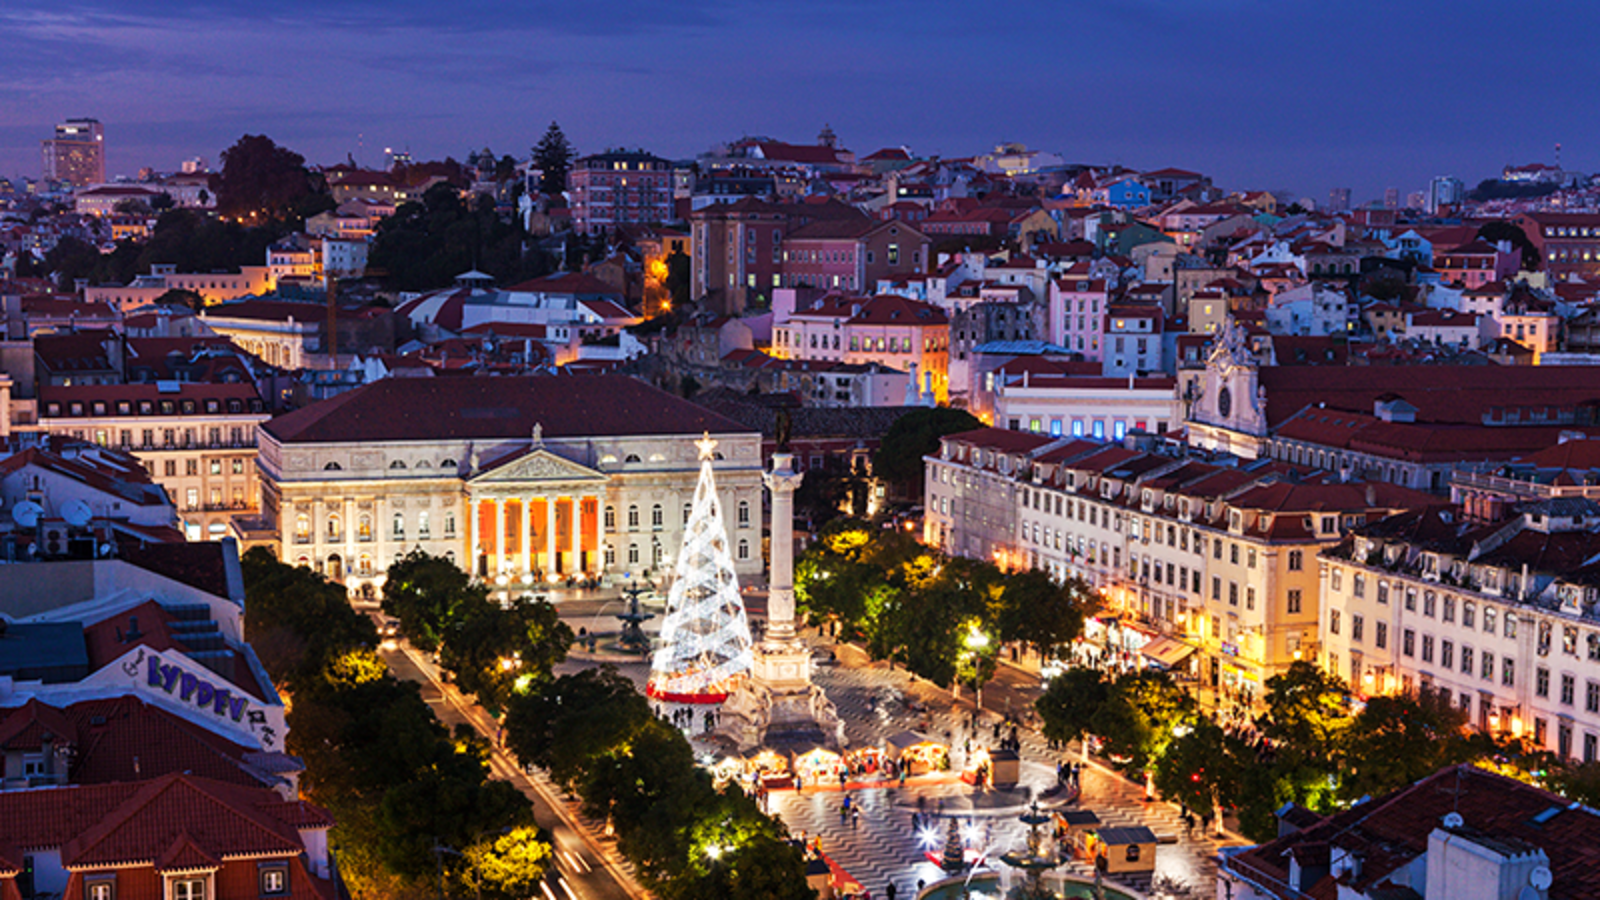 Christmas in Lisbon - the city square lit up by a white Christmas tree